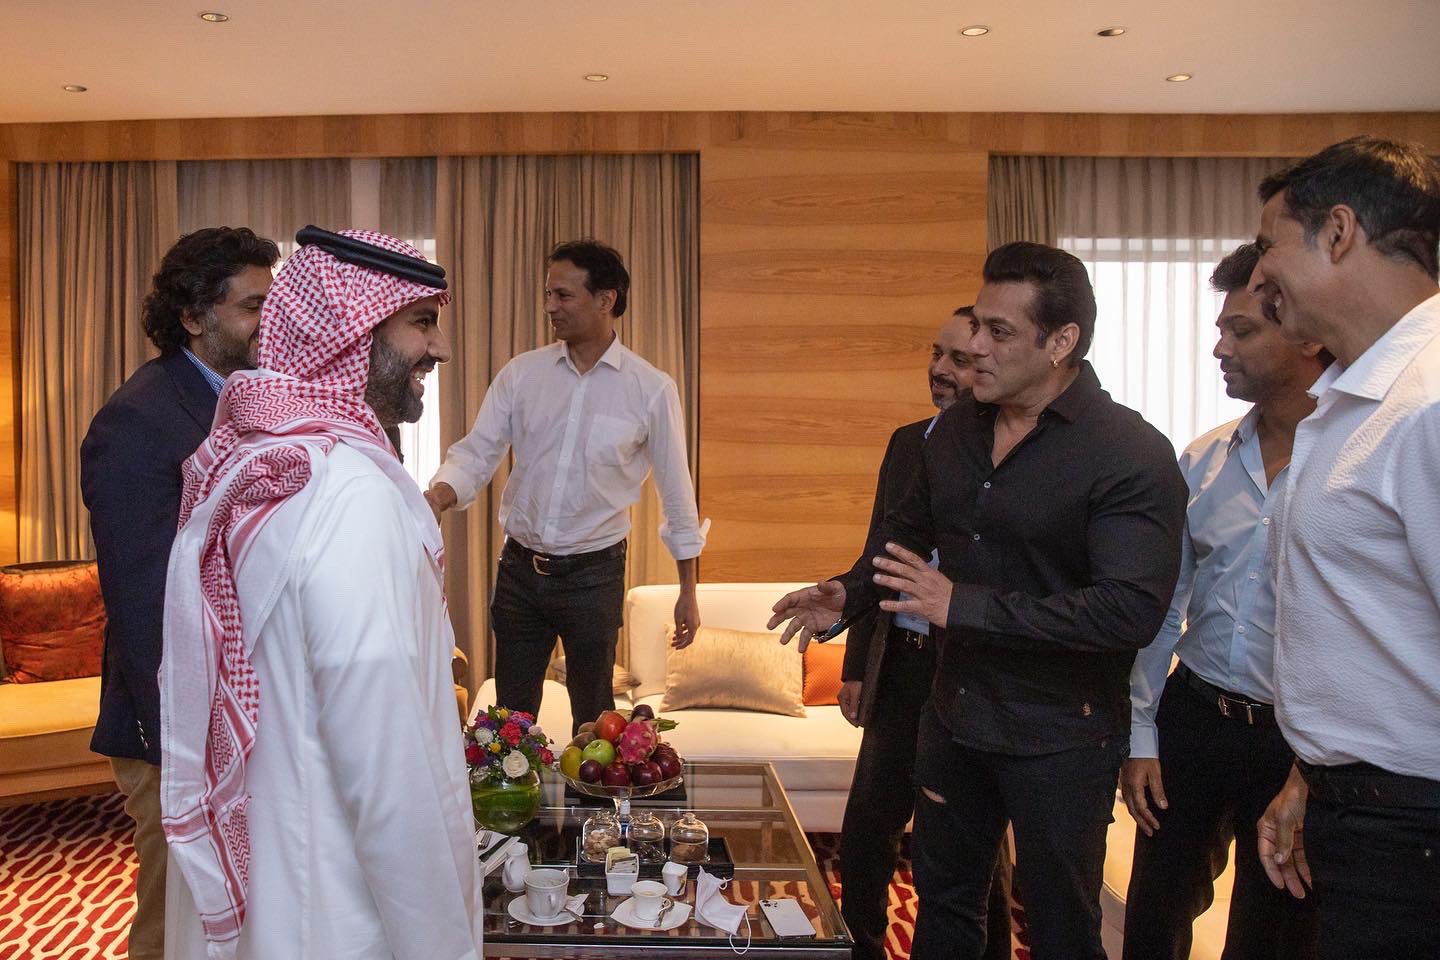 Akshay Kumar and Salman Khan were also spotted with Saudi Minister and Shah Rukh Khan